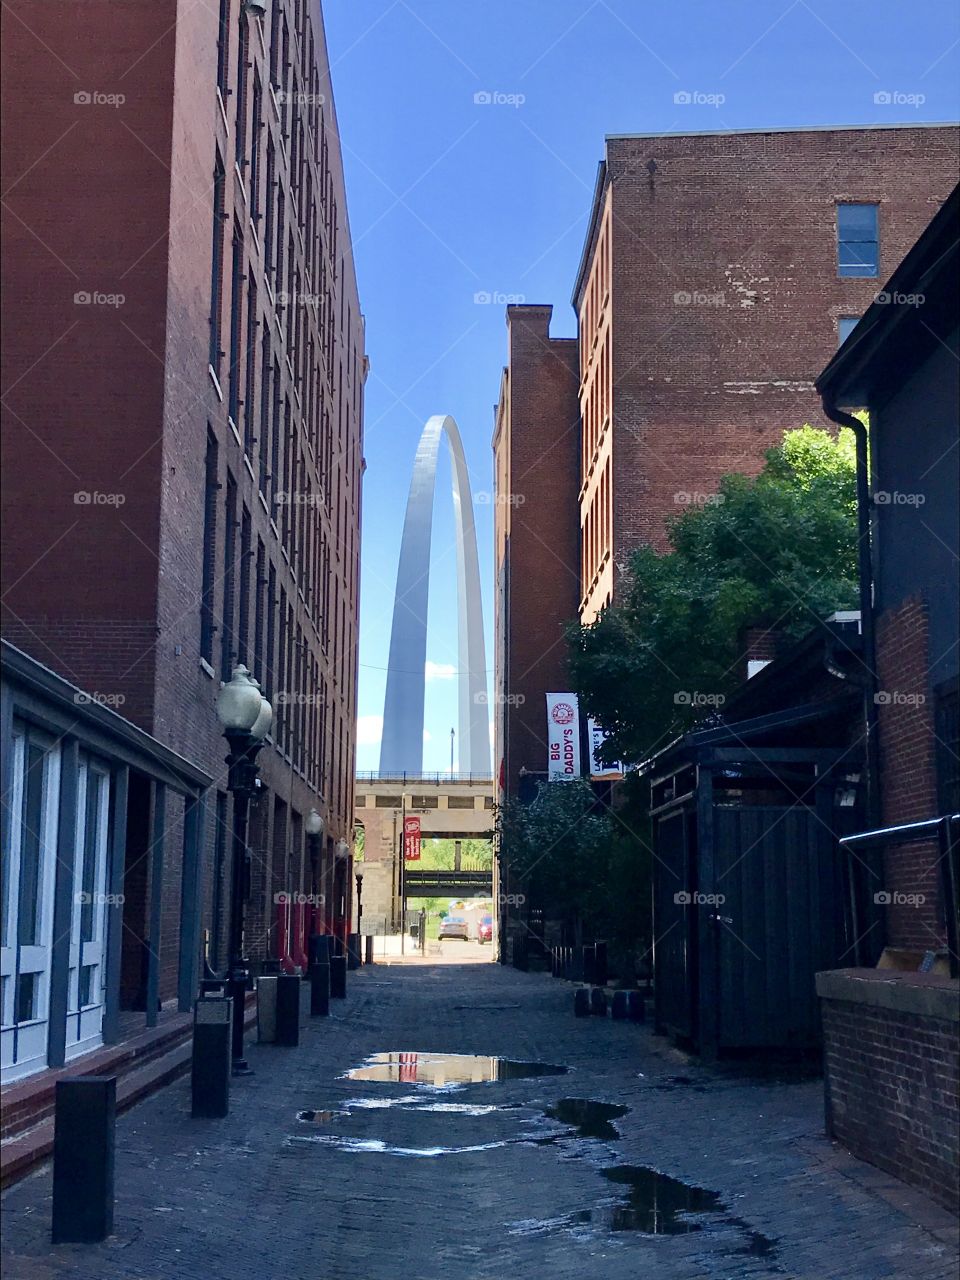 Gateway Arch from Laclede’s Landing, St. Louis, Missouri, United States 